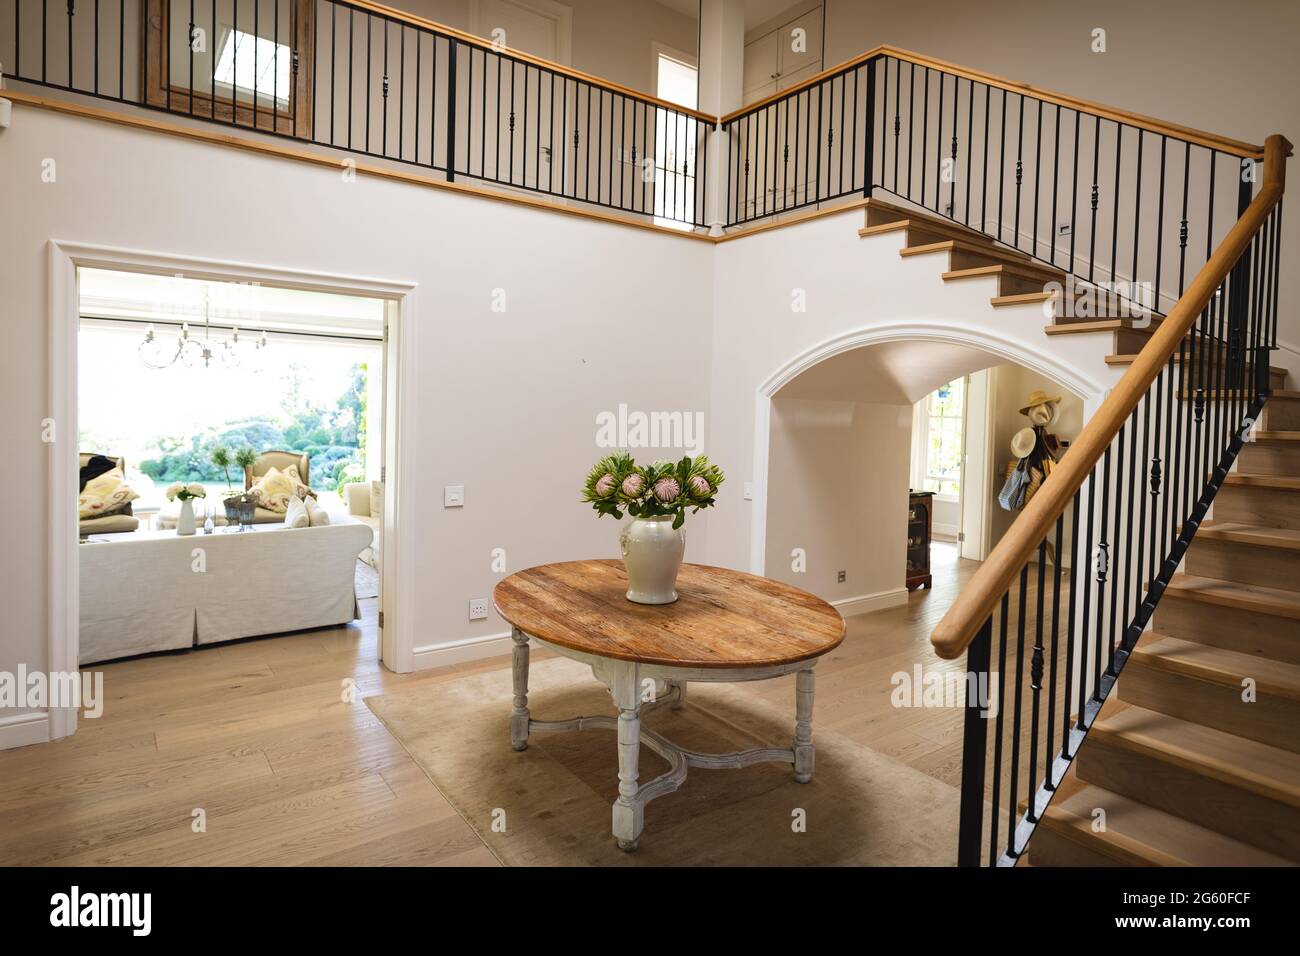 General view of house interior with table and vase with flowers in spacious hallway and staircase Stock Photo